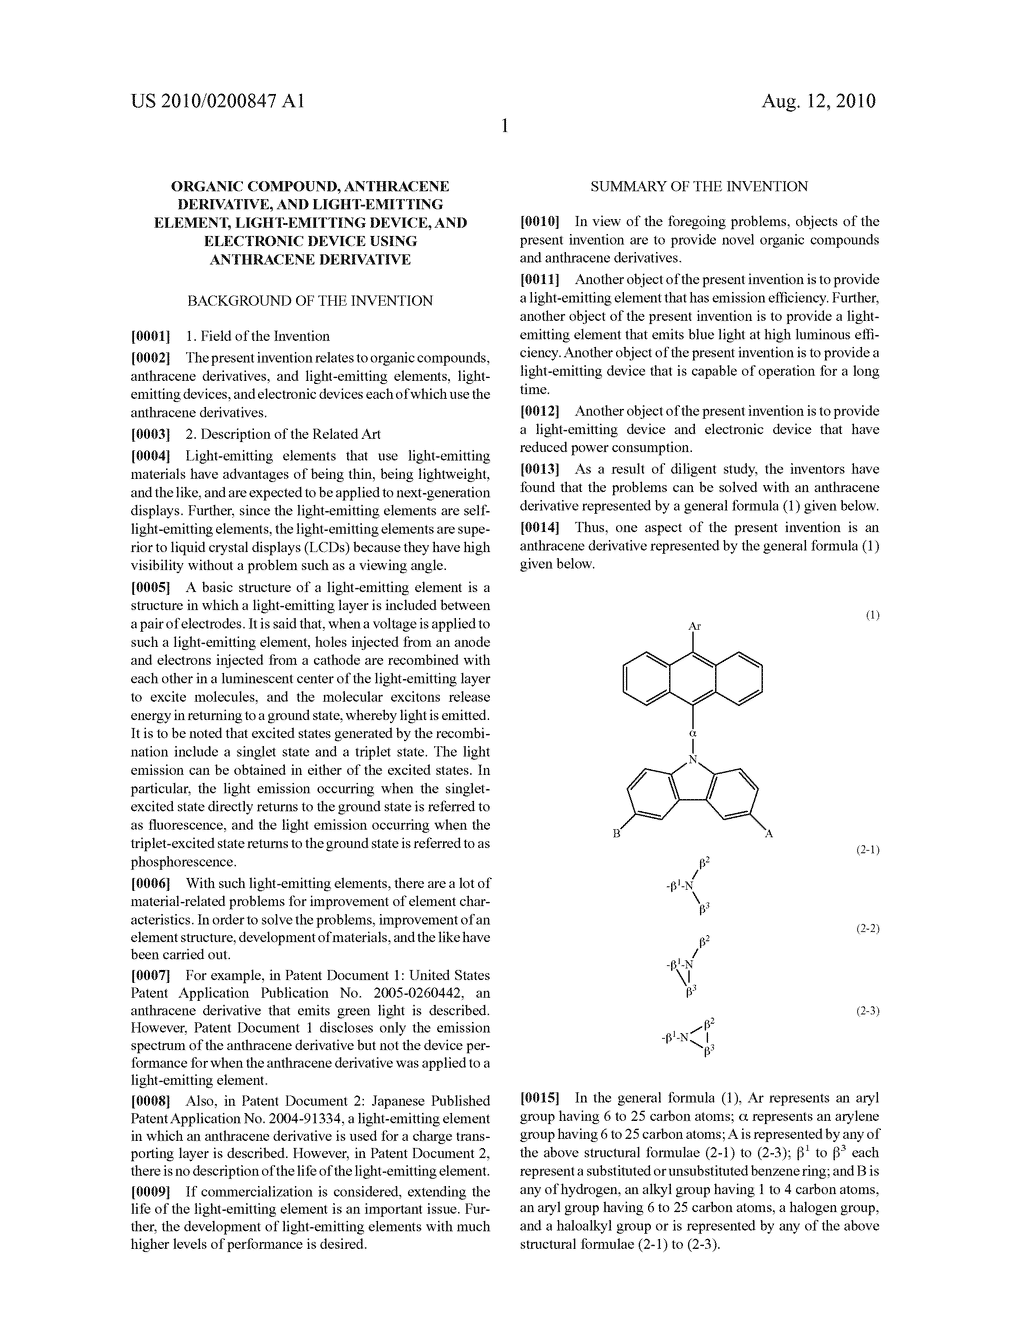 ORGANIC COMPOUND, ANTHRACENE DERIVATIVE, AND LIGHT-EMITTING ELEMENT, LIGHT-EMITTING DEVICE, AND ELECTRONIC DEVICE USING ANTHRACENE DERIVATIVE - diagram, schematic, and image 73